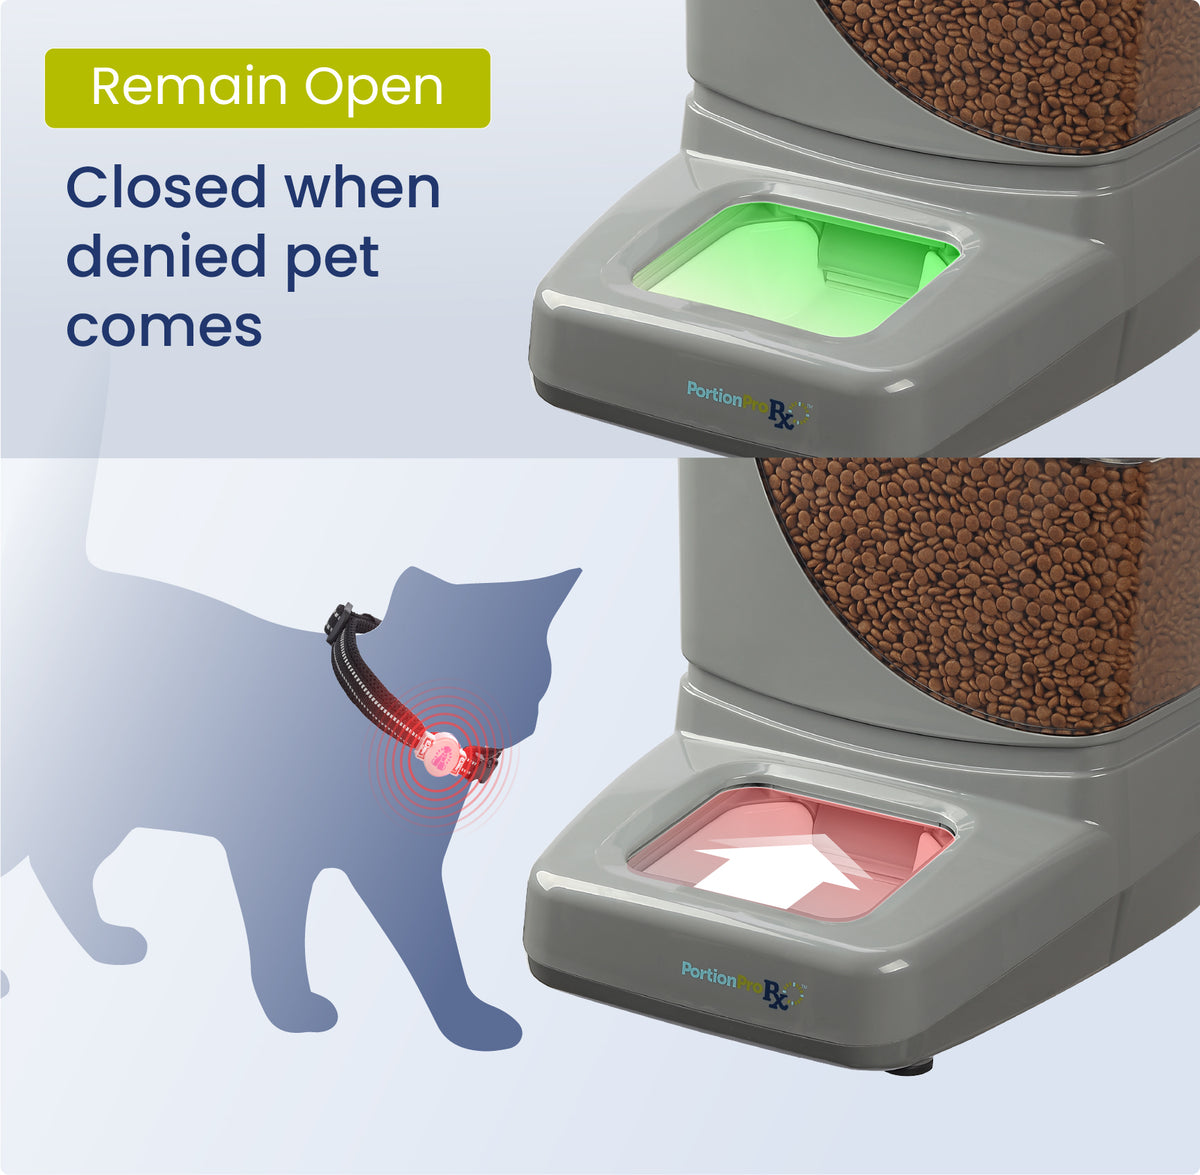 the portionpro rfid open mode that excludes the animal with rfid tag from taking food from the feeder